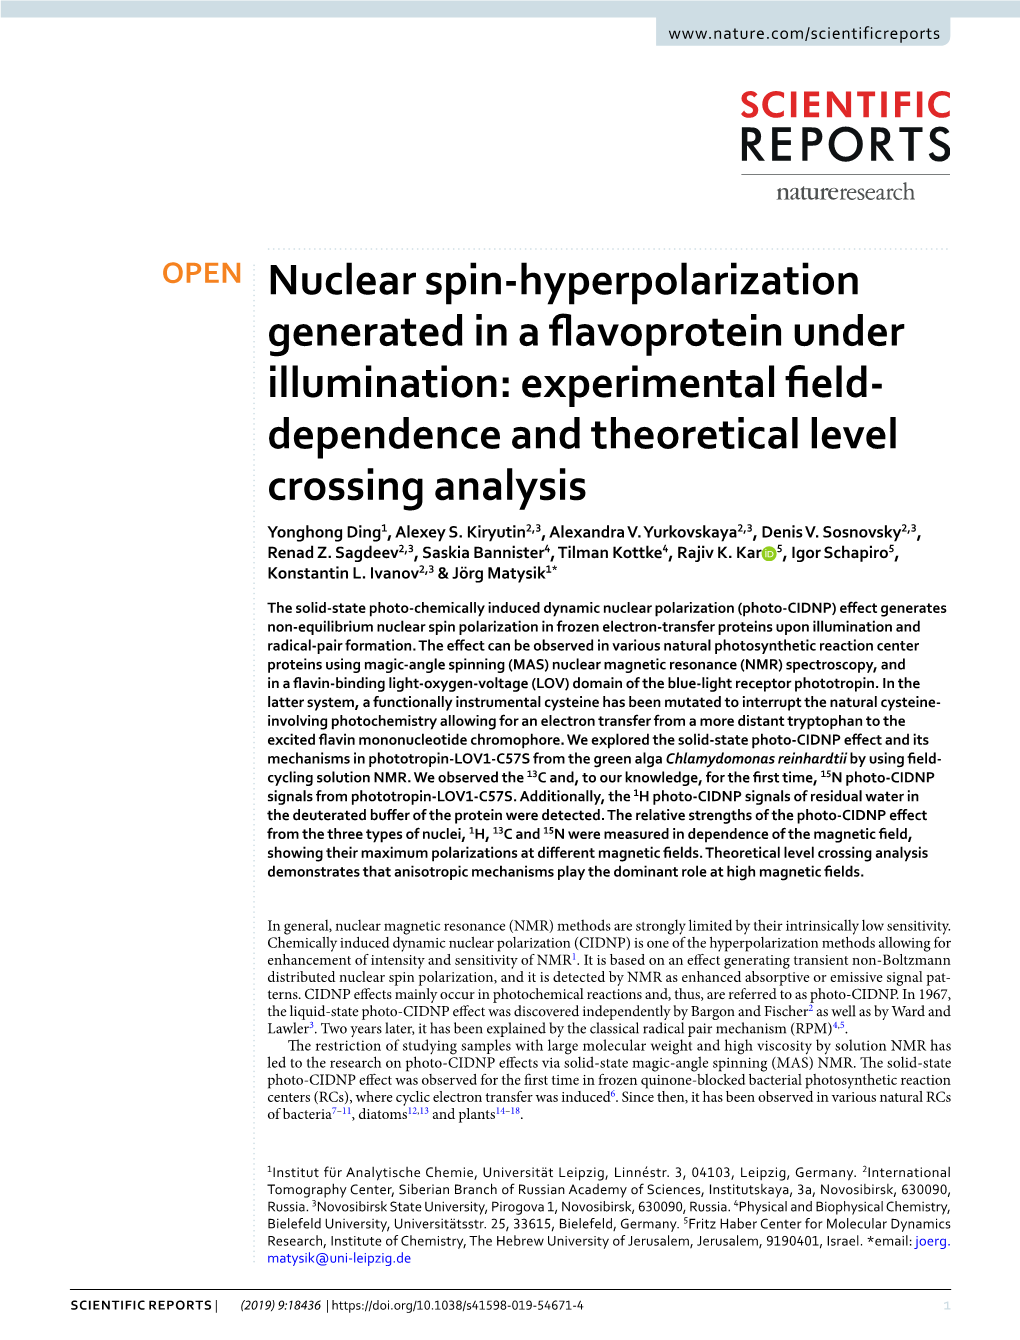 Nuclear Spin-Hyperpolarization Generated in a Flavoprotein